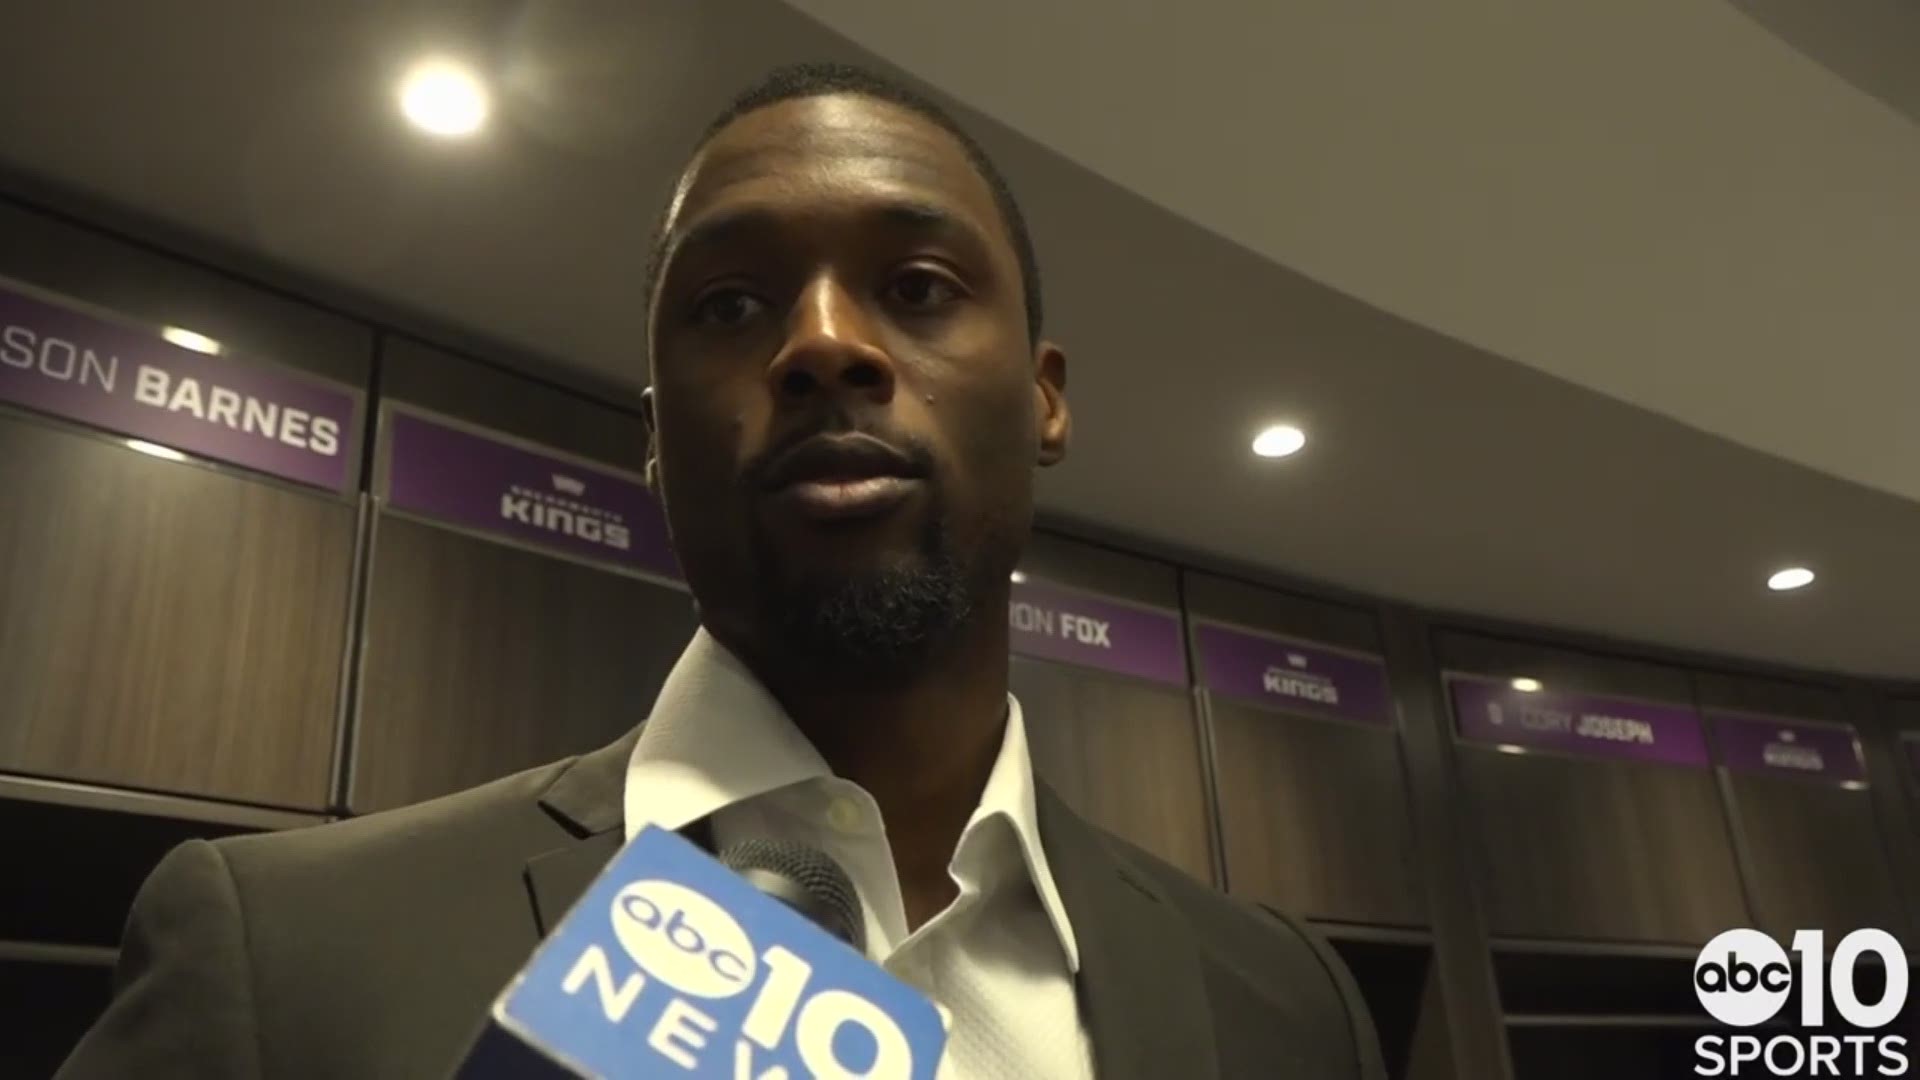 Following Monday's Kings loss to the Denver Nuggets, Harrison Barnes talks about Sacramento's 0-4 start to the season & getting back to an up-tempo style of play.